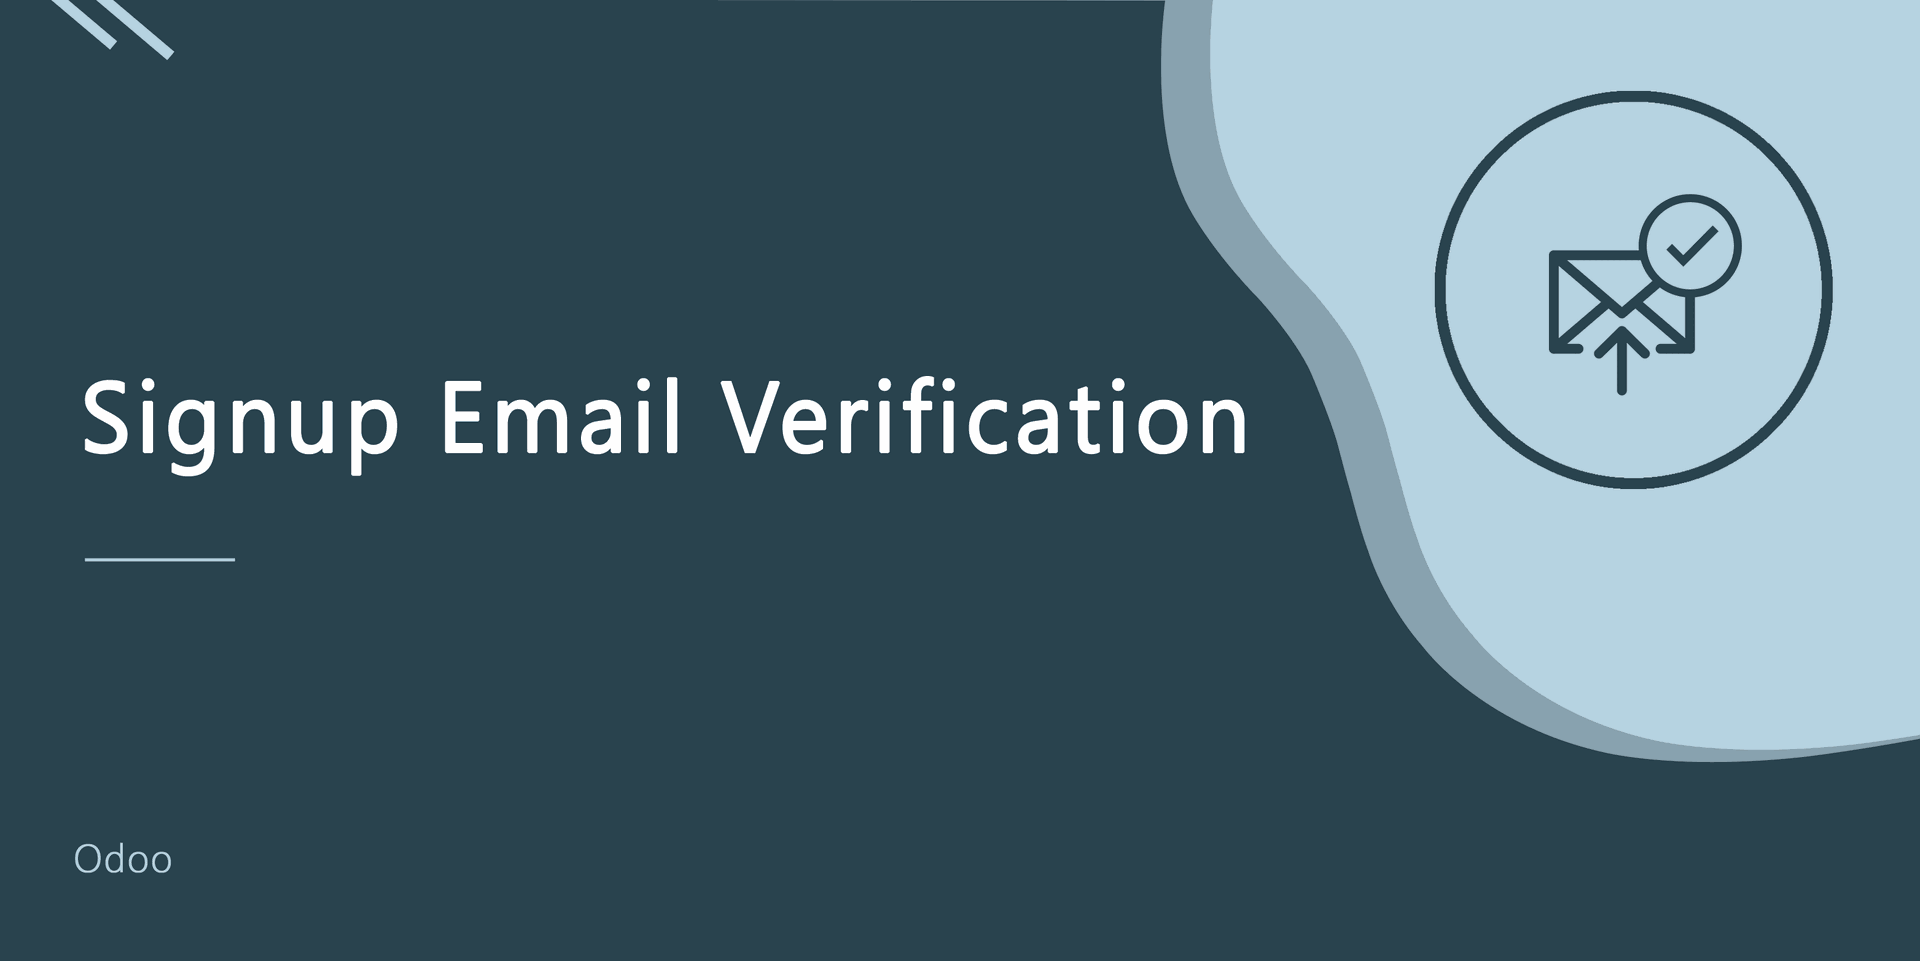 Signup Email Verification
